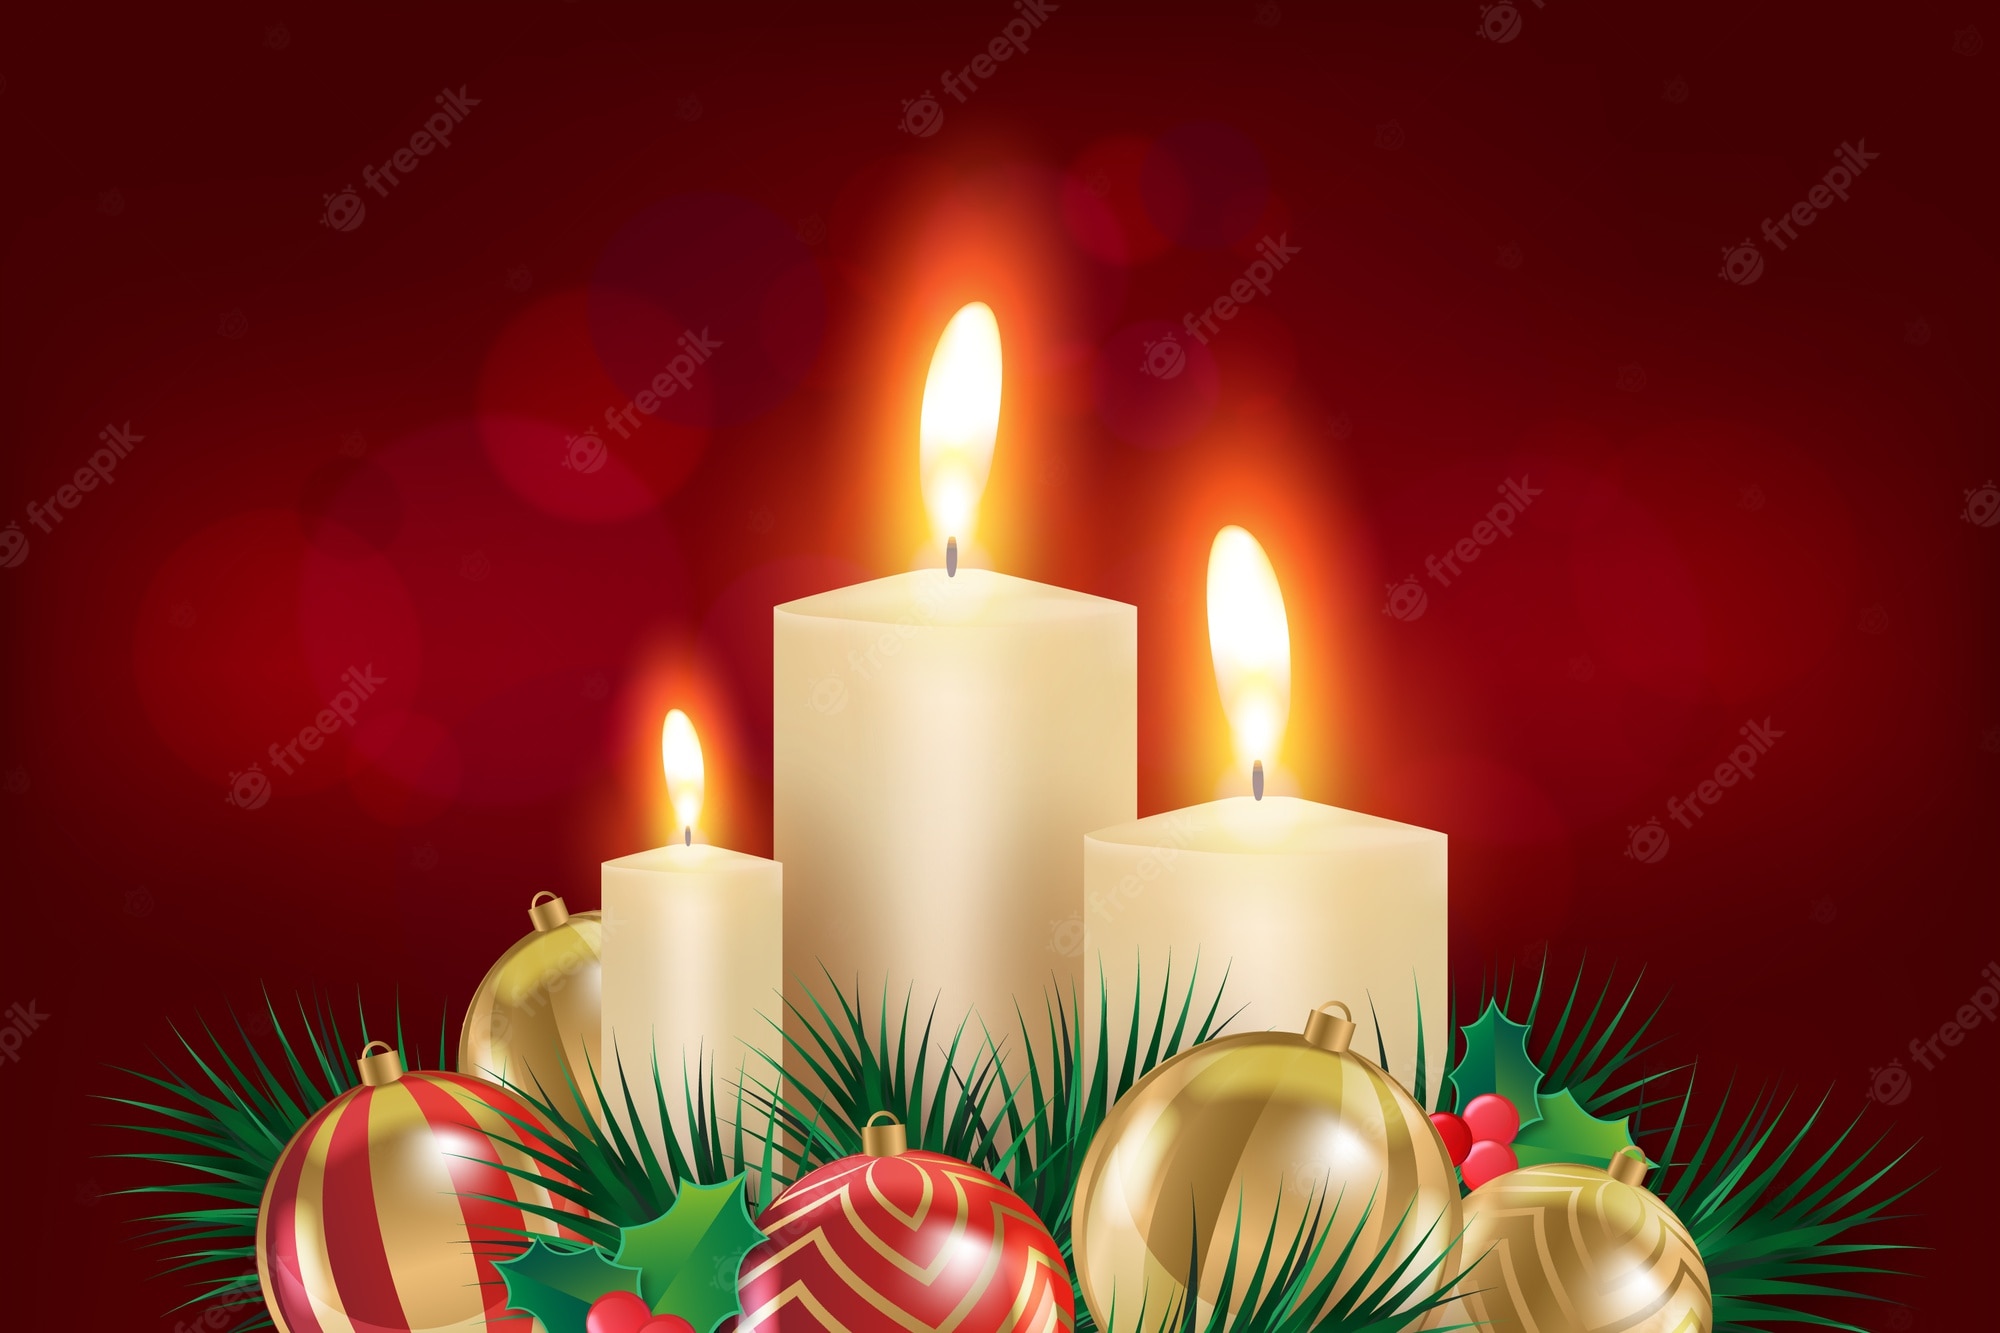 Christmas candle Image. Free Vectors, & PSD